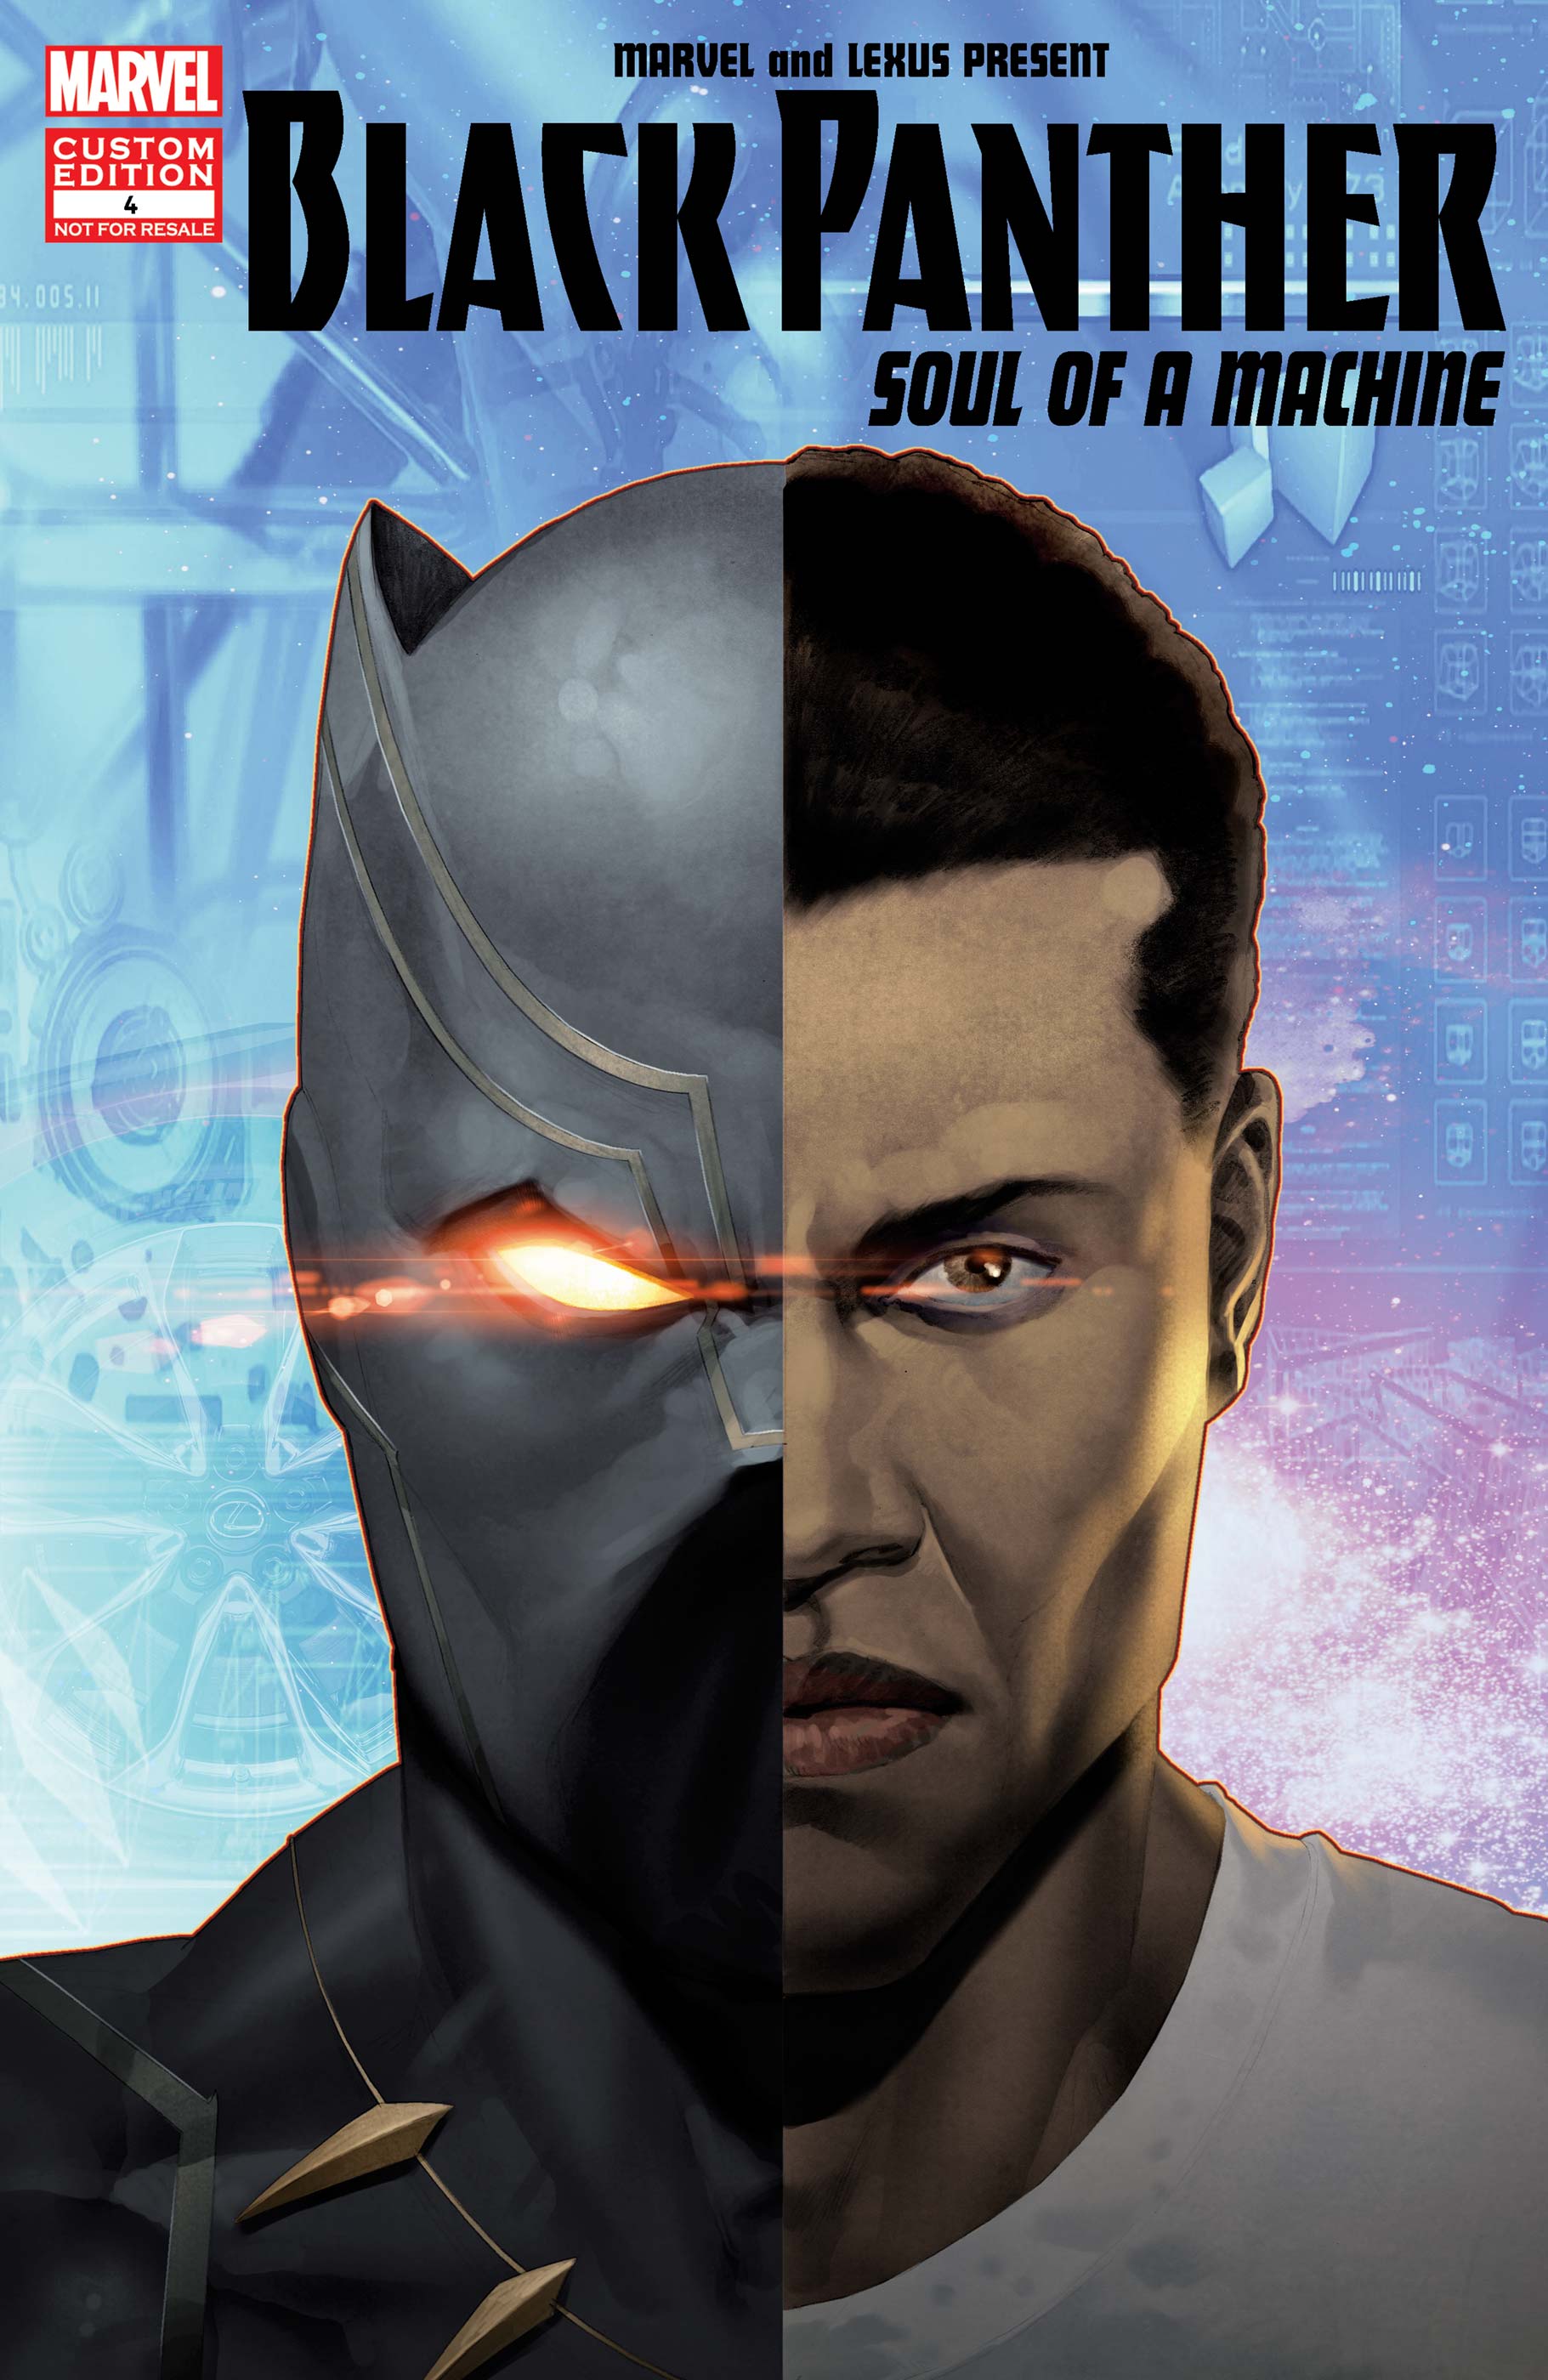 Black Panther: Soul of a Machine – Chapter Four (2017)